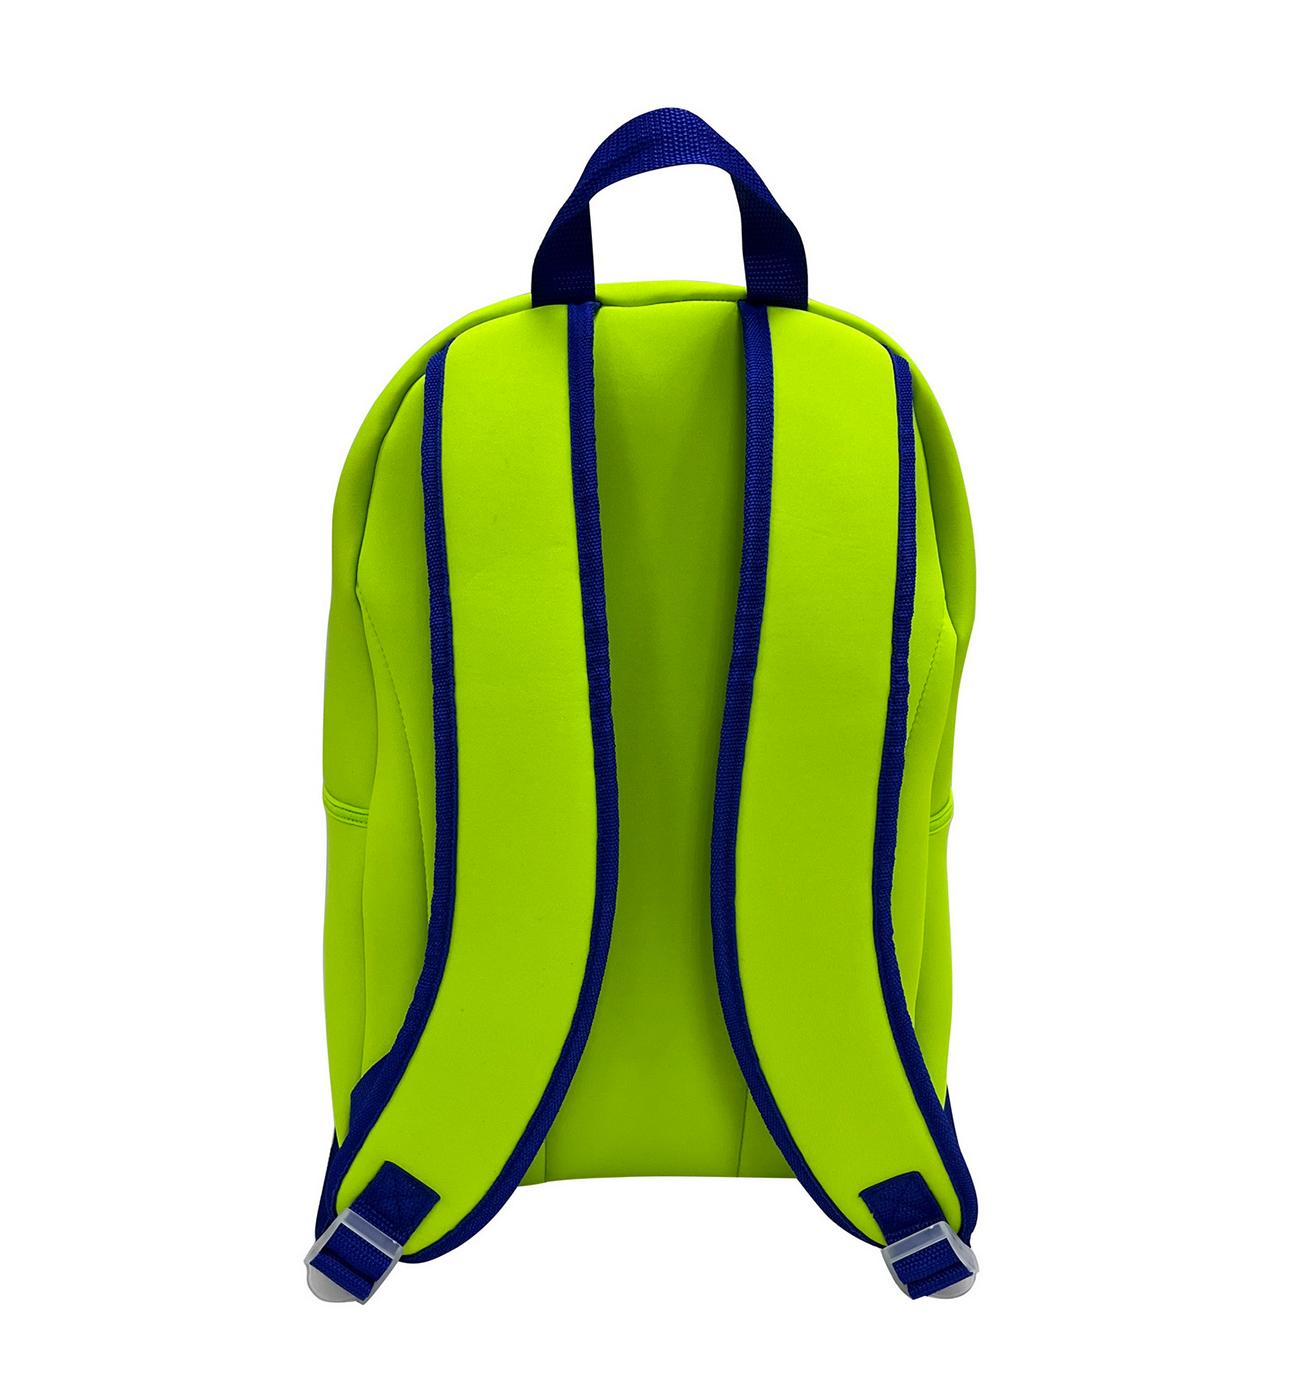 Tech Gear Wetsuit Backpack - Green & Blue; image 2 of 3